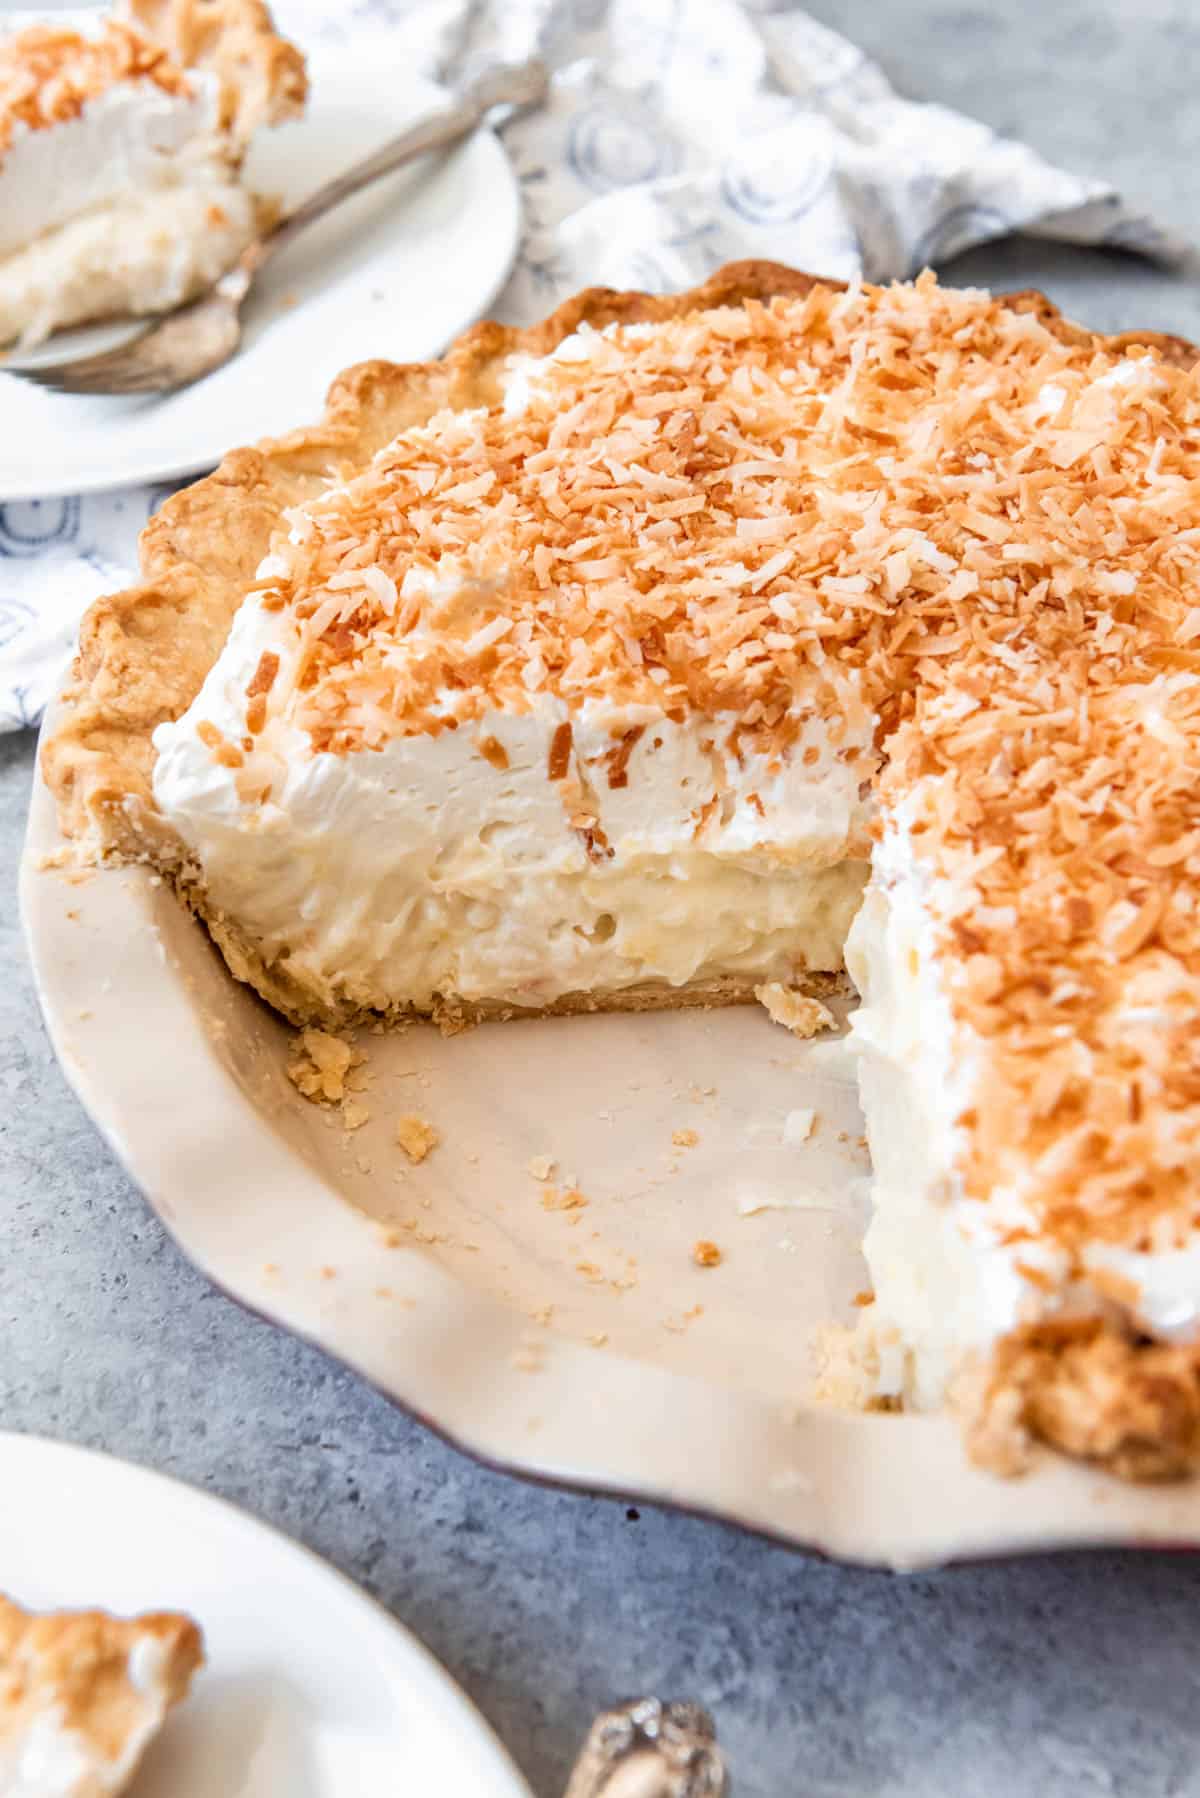 A homemade coconut cream pie with slices removed.